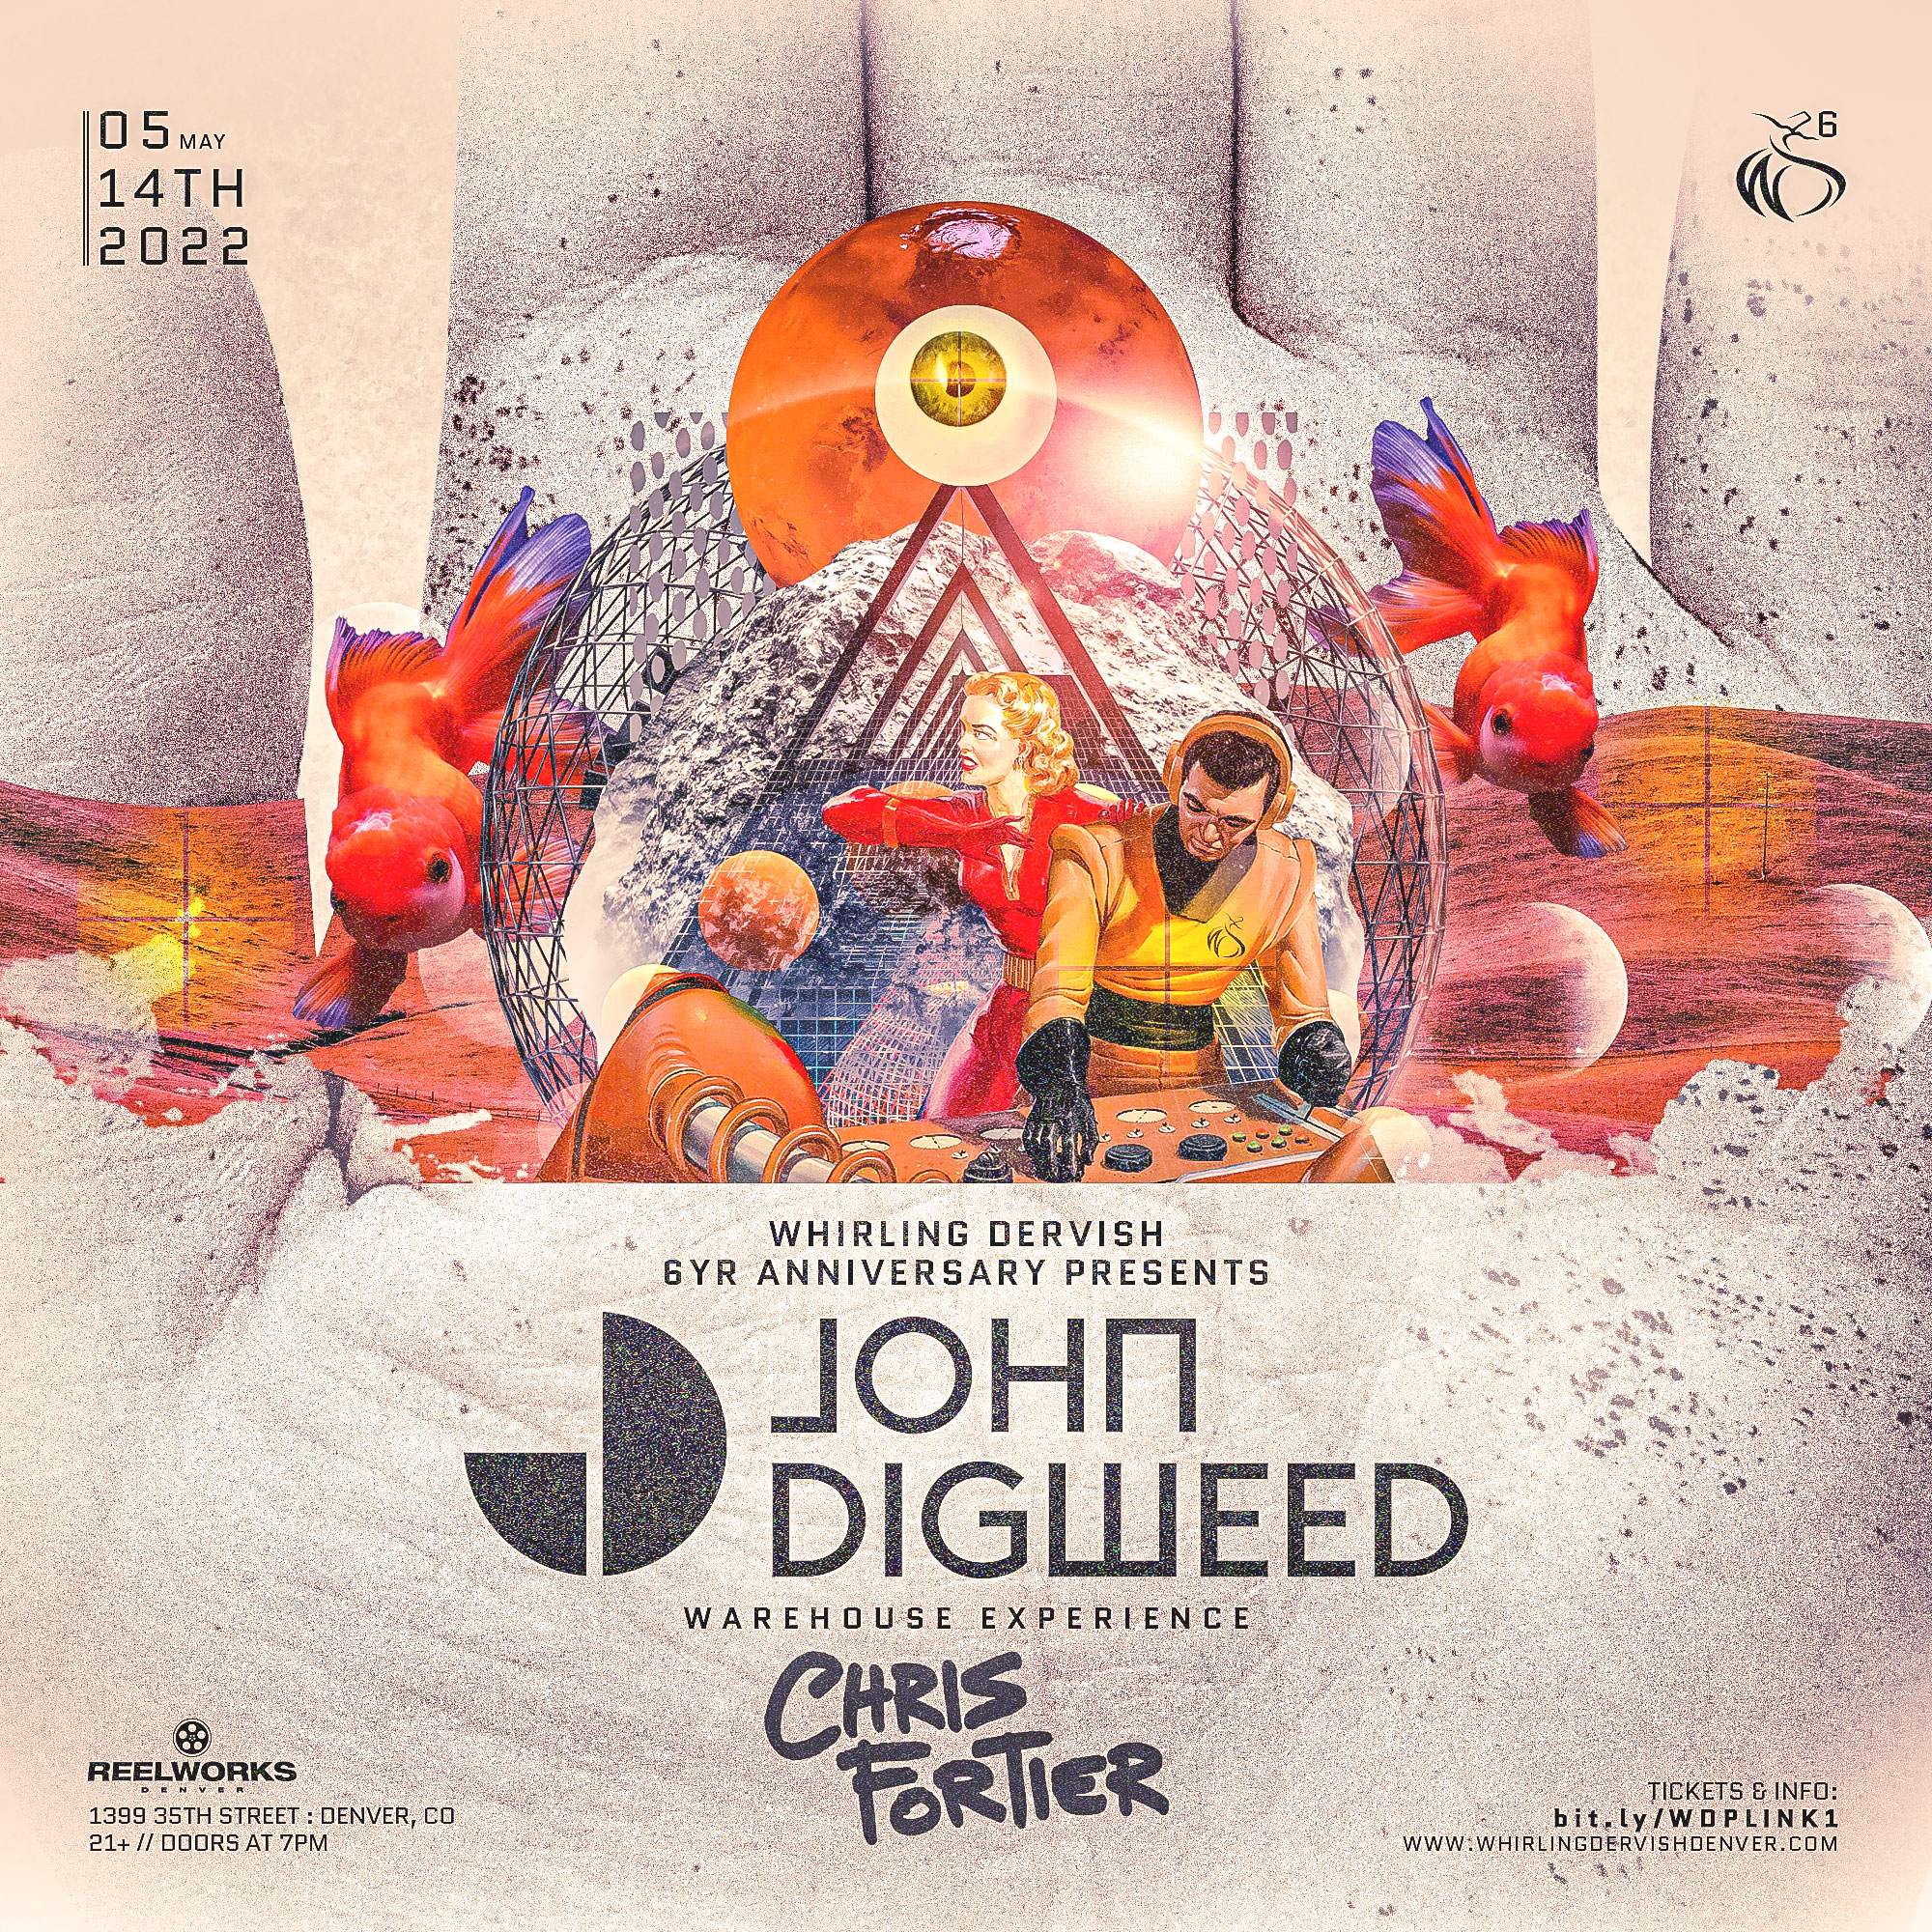 John Digweed, Chris Fortier Warehouse Experience - Whirling Dervish 6 Year Anniversary - Página frontal